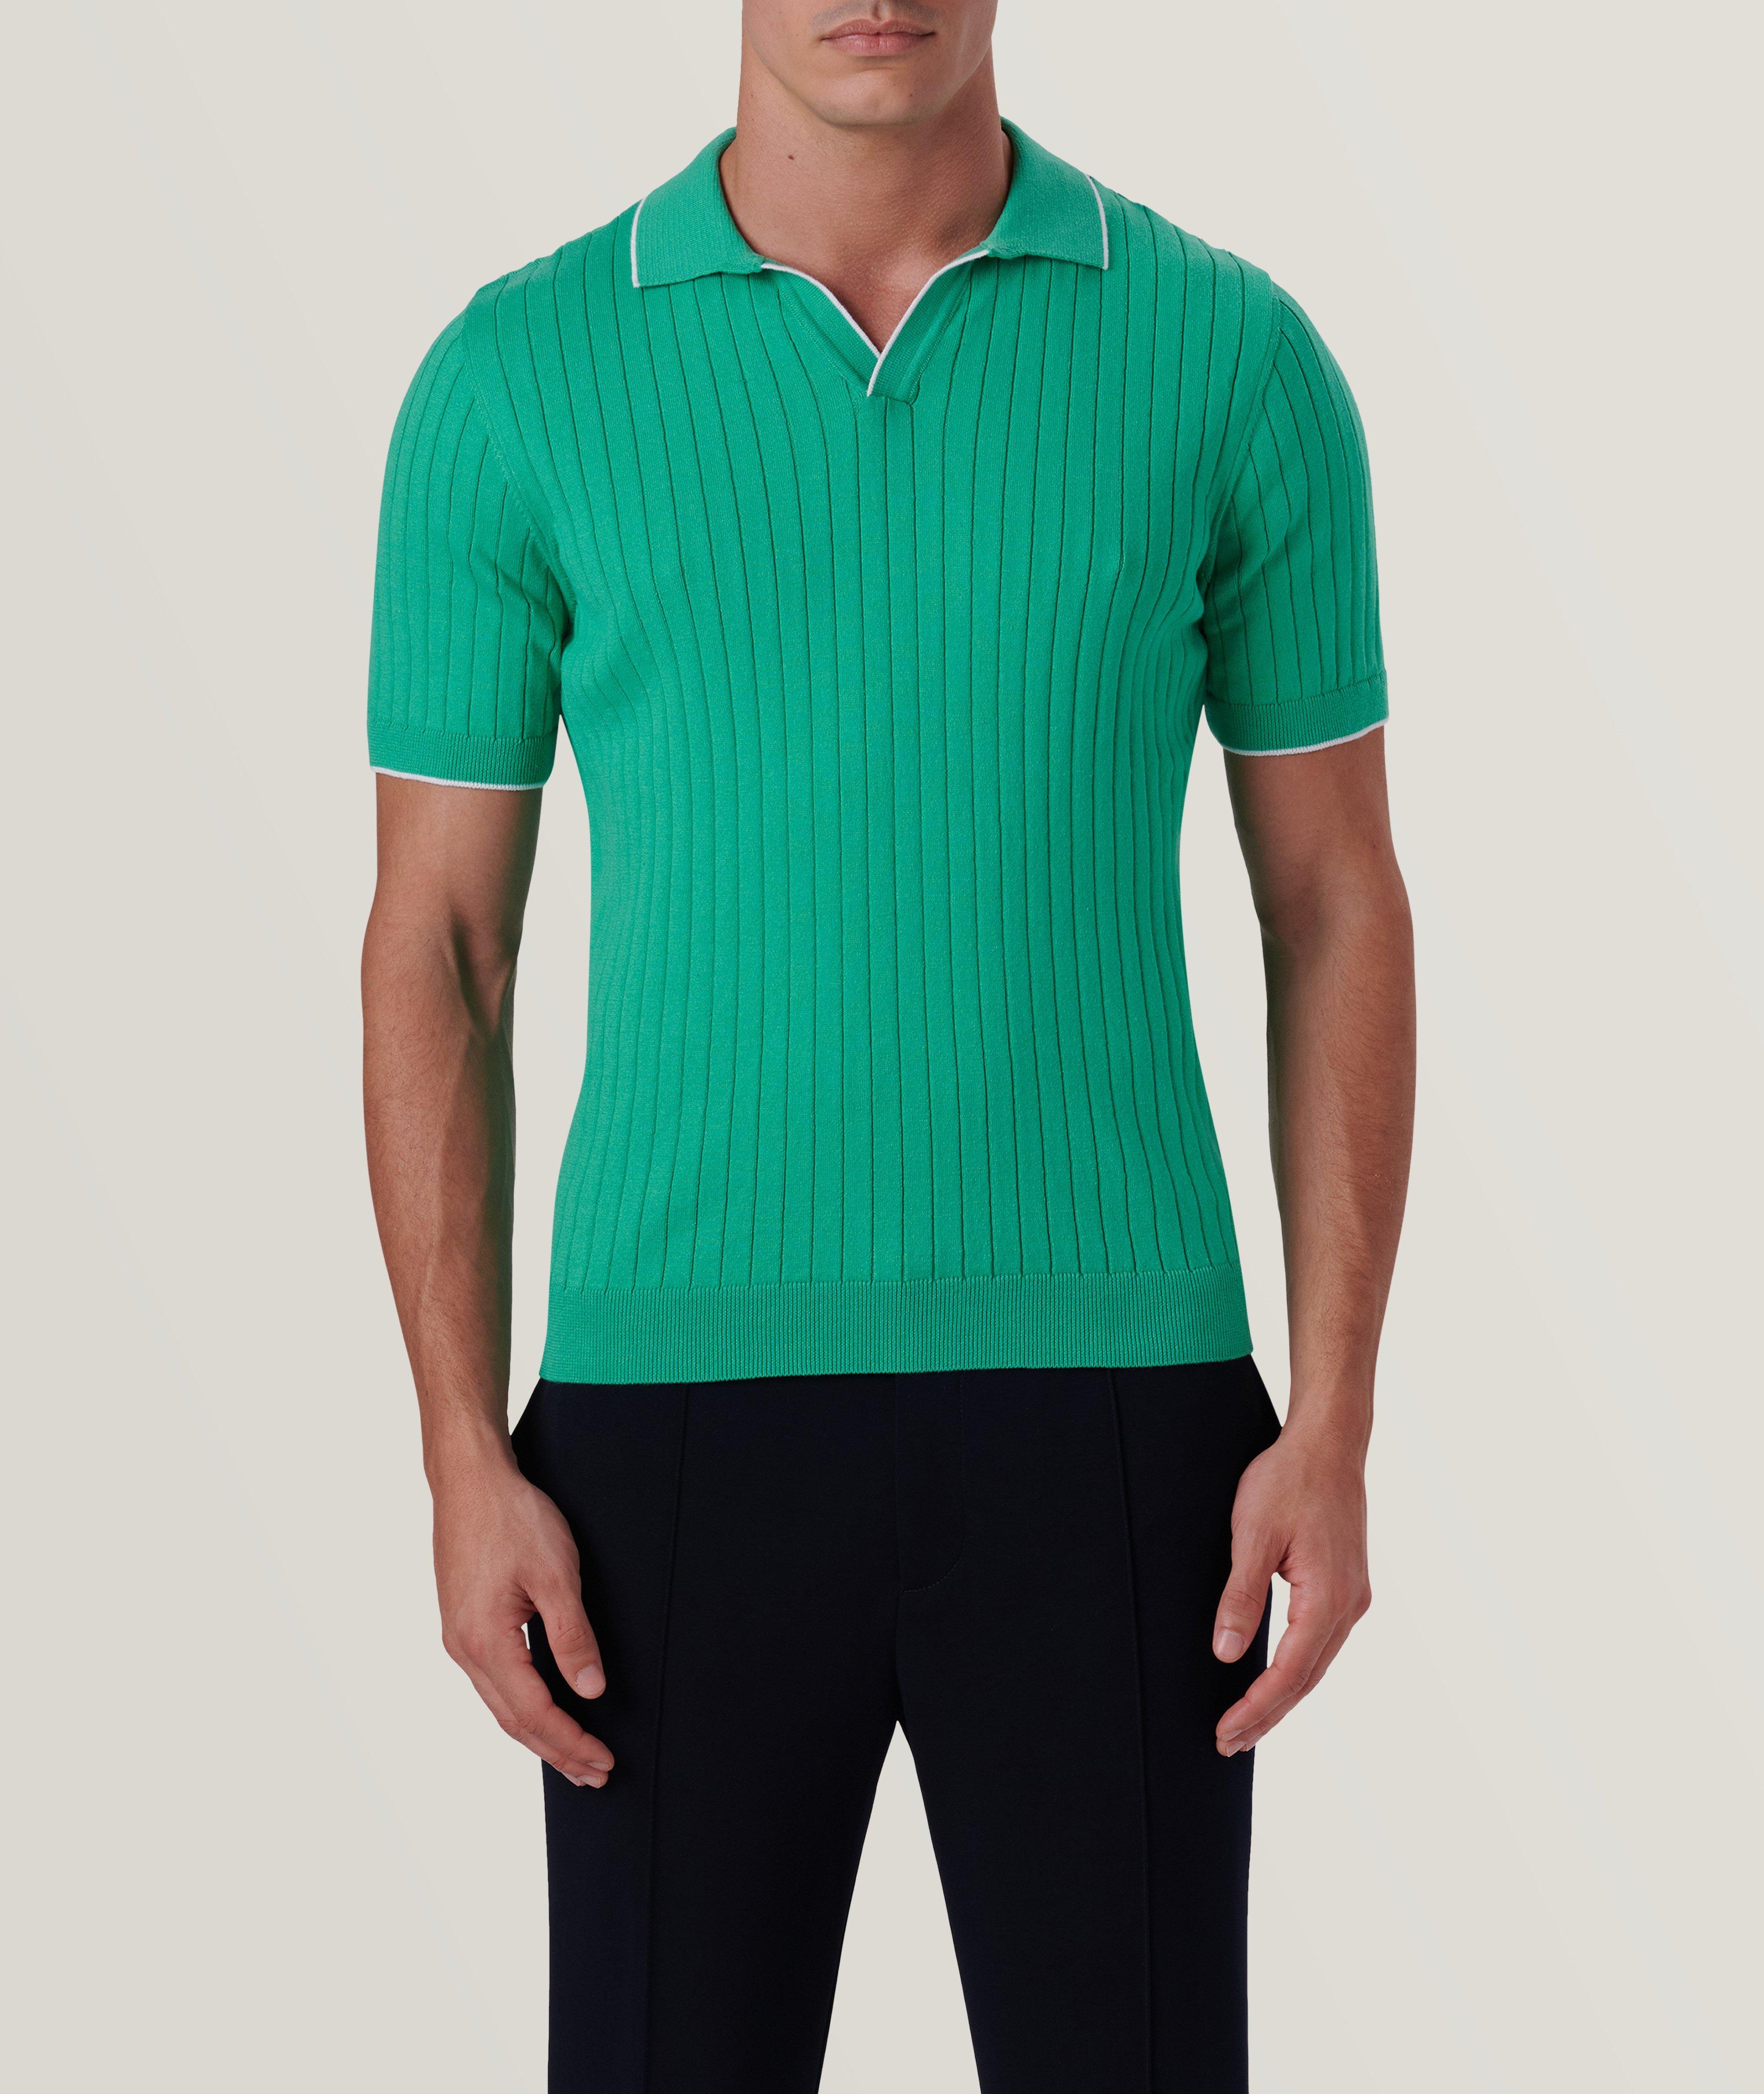 Ribbed Knit Cotton-Blend Polo image 2